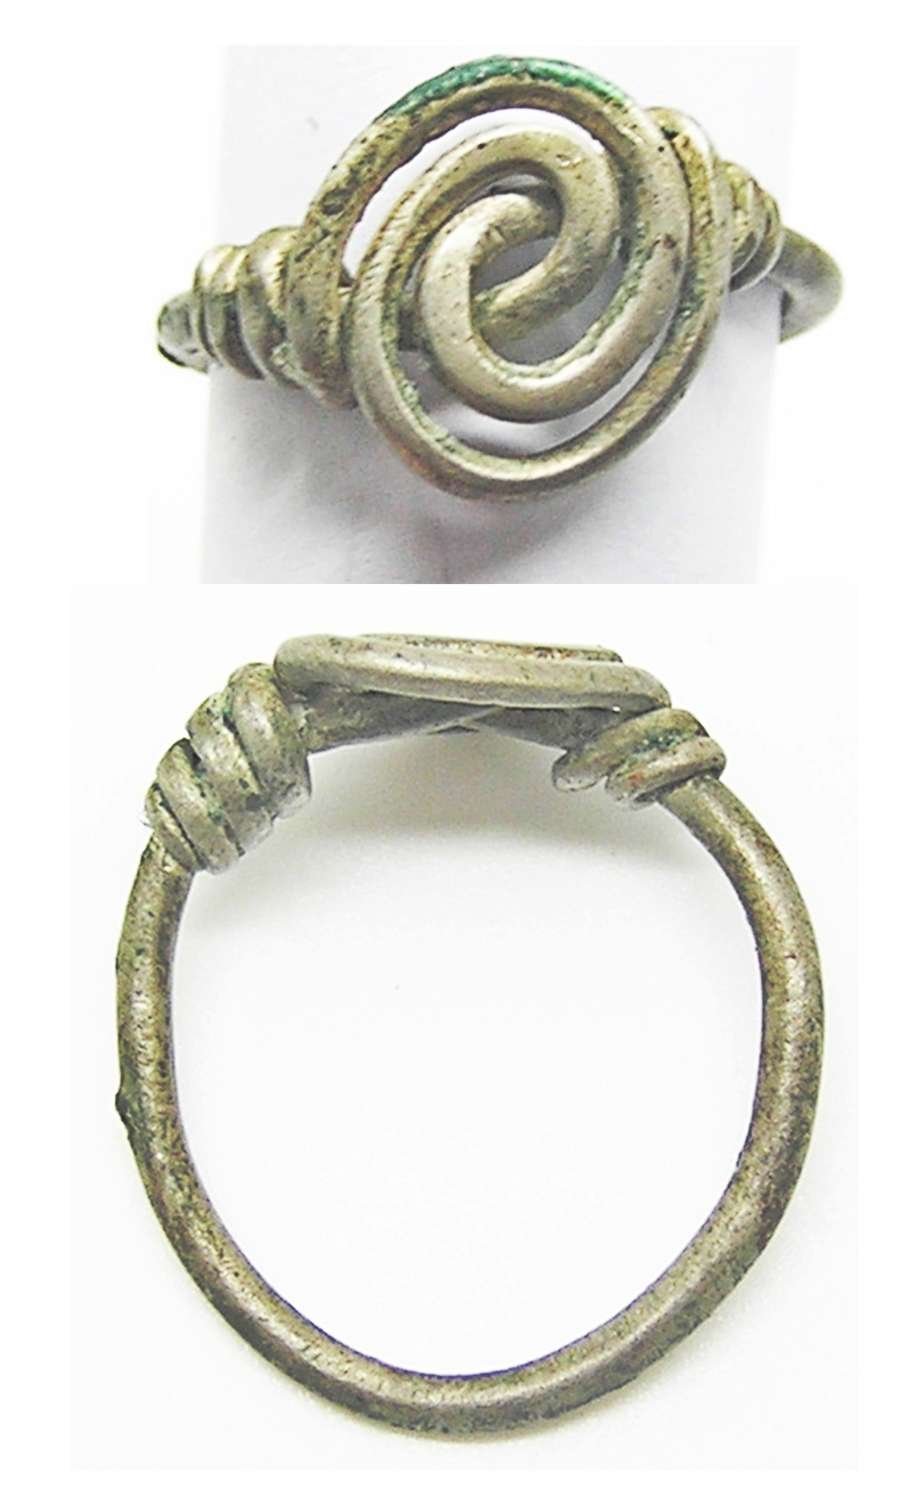 Early Medieval Saxon silver spiral ring